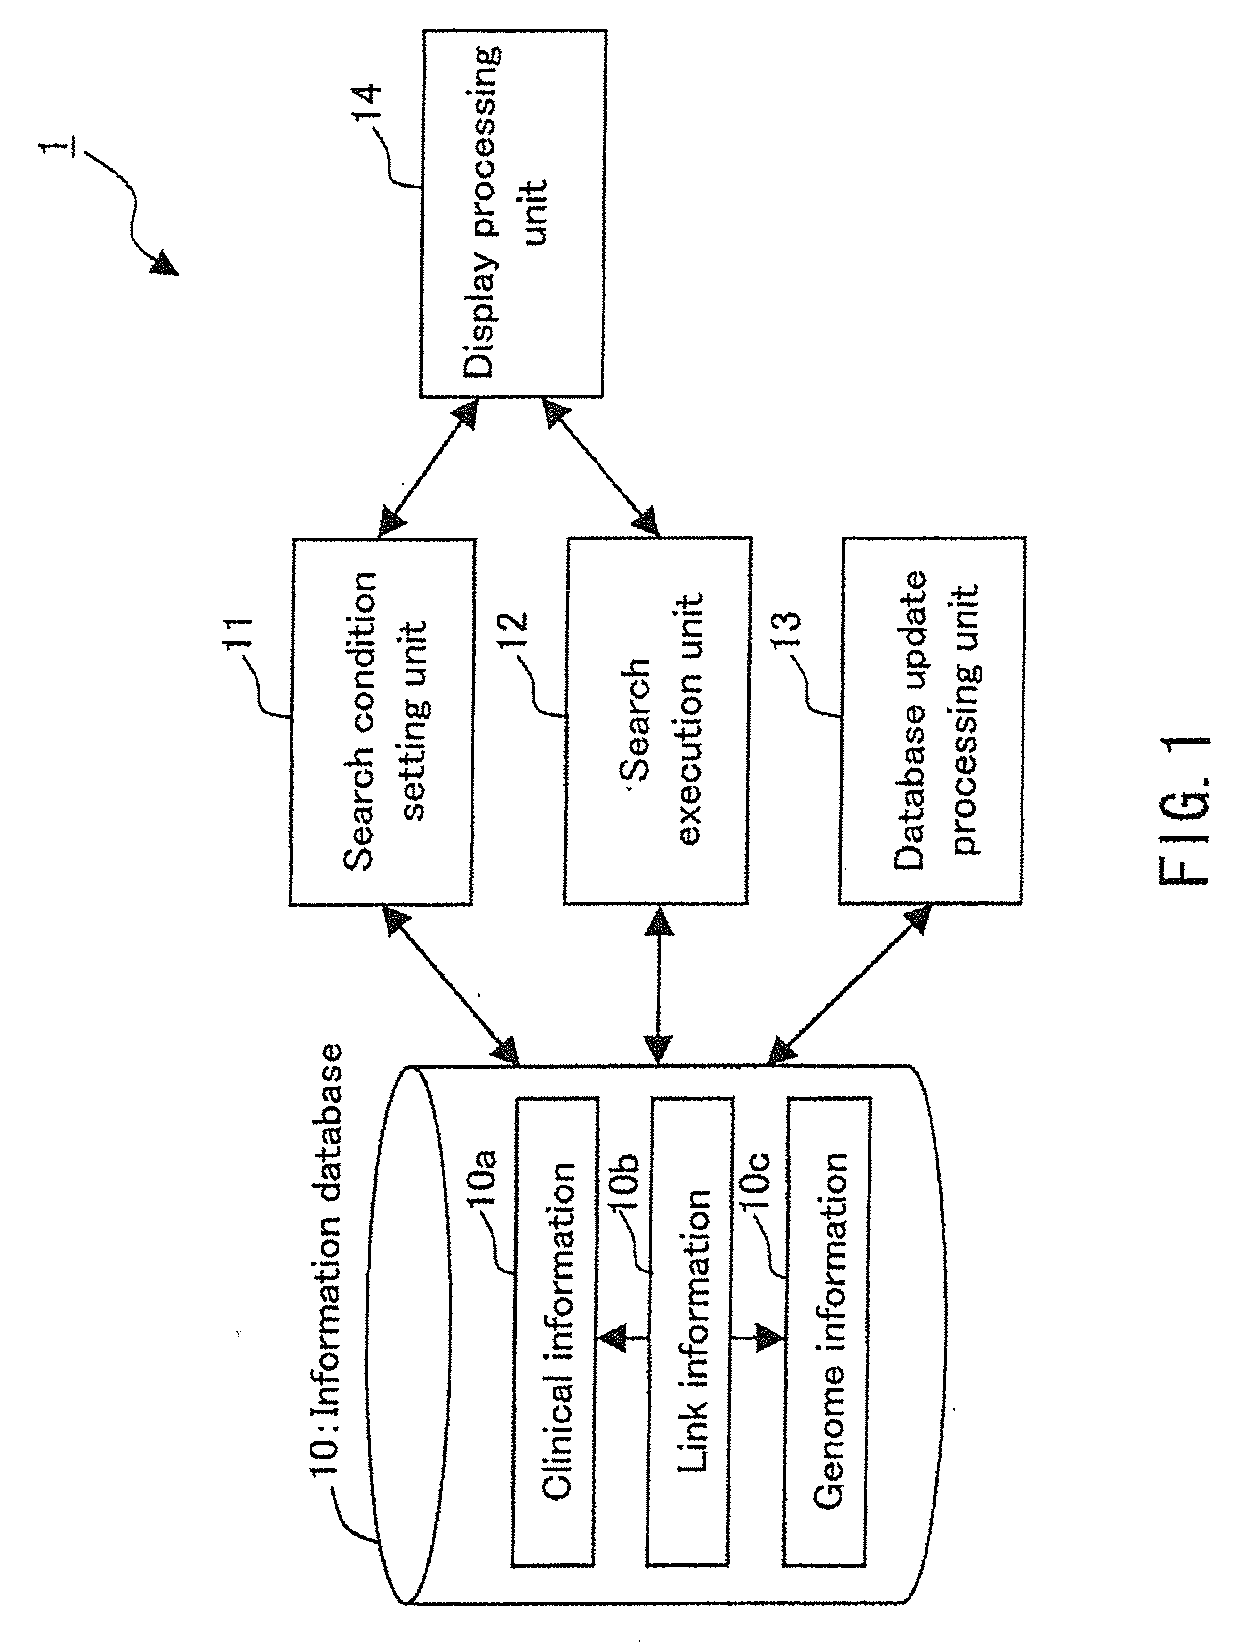 Integrated database system of genome information and clinical information and a method for creating database included therein